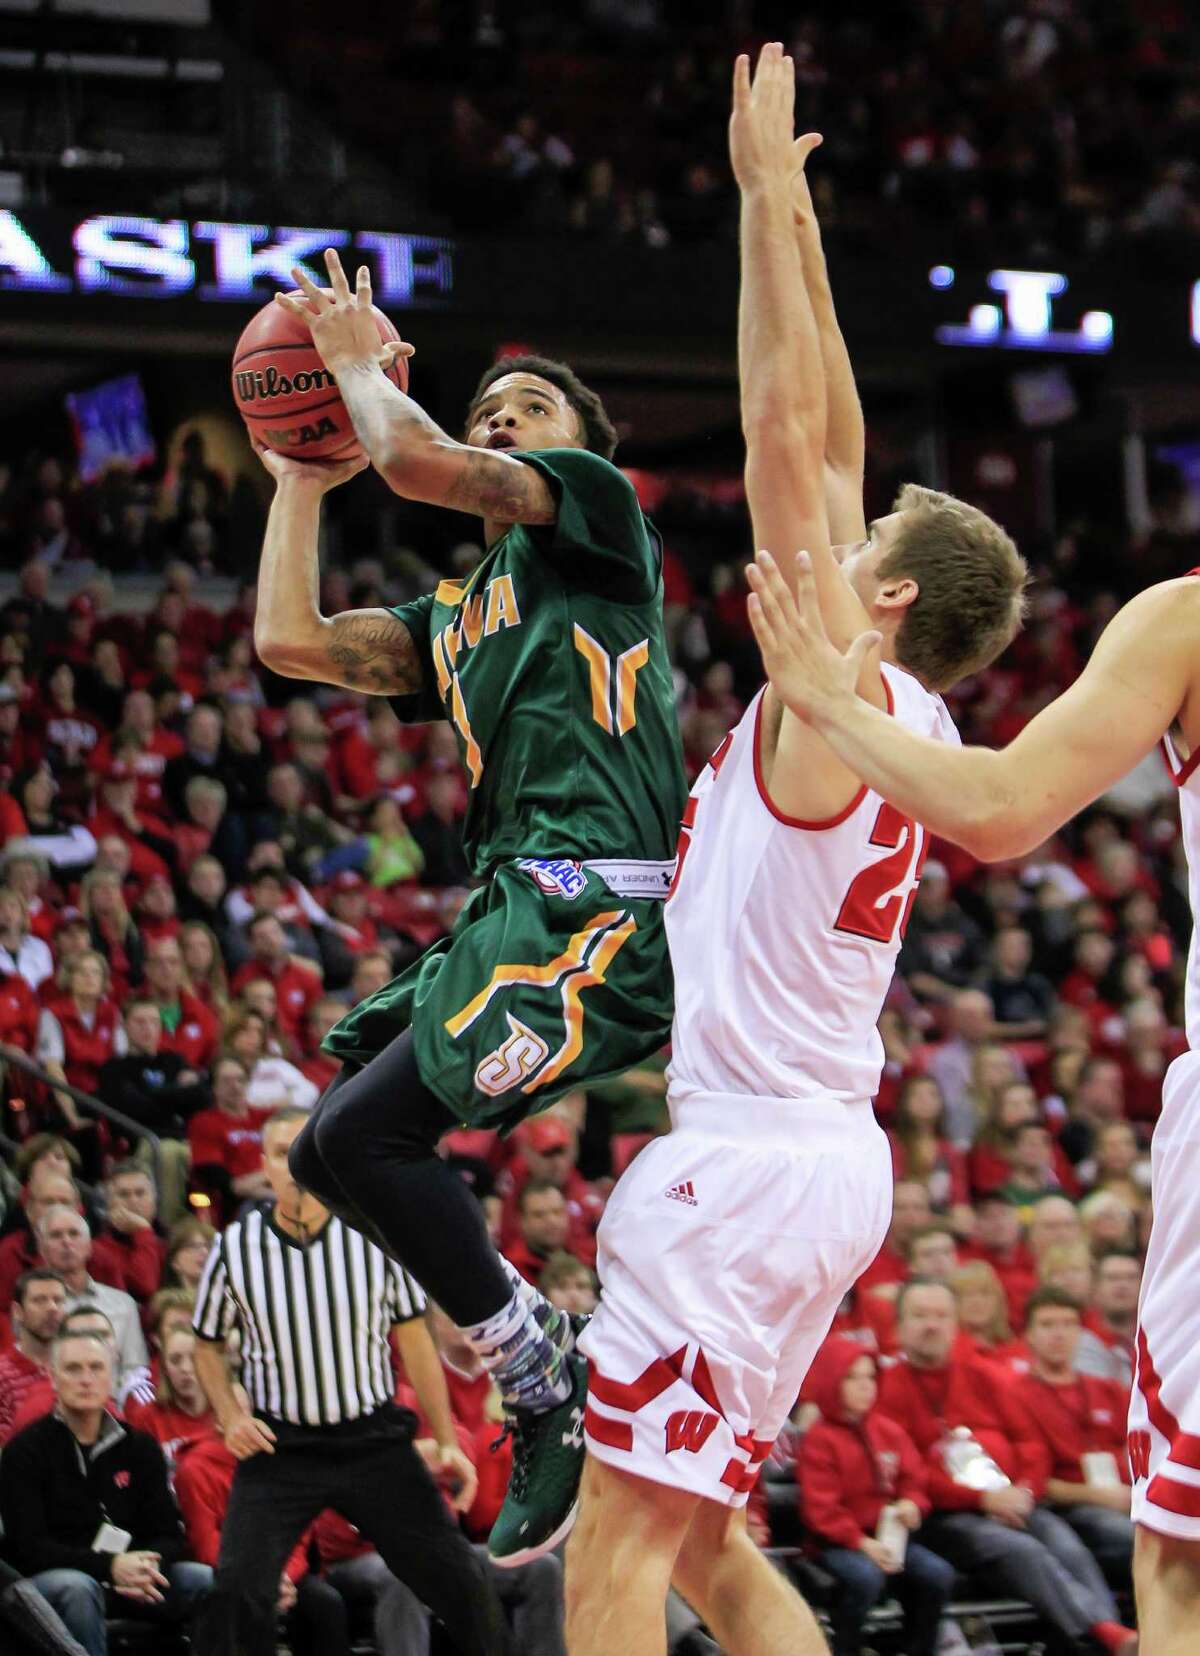 Siena's Marquis Wright, left, shoots against Wisconsin's Ethan Happ (22) during the first half of an NCAA college basketball game Sunday, Nov. 15, 2015, in Madison, Wis. (AP Photo/Andy Manis) ORG XMIT: WIAM107